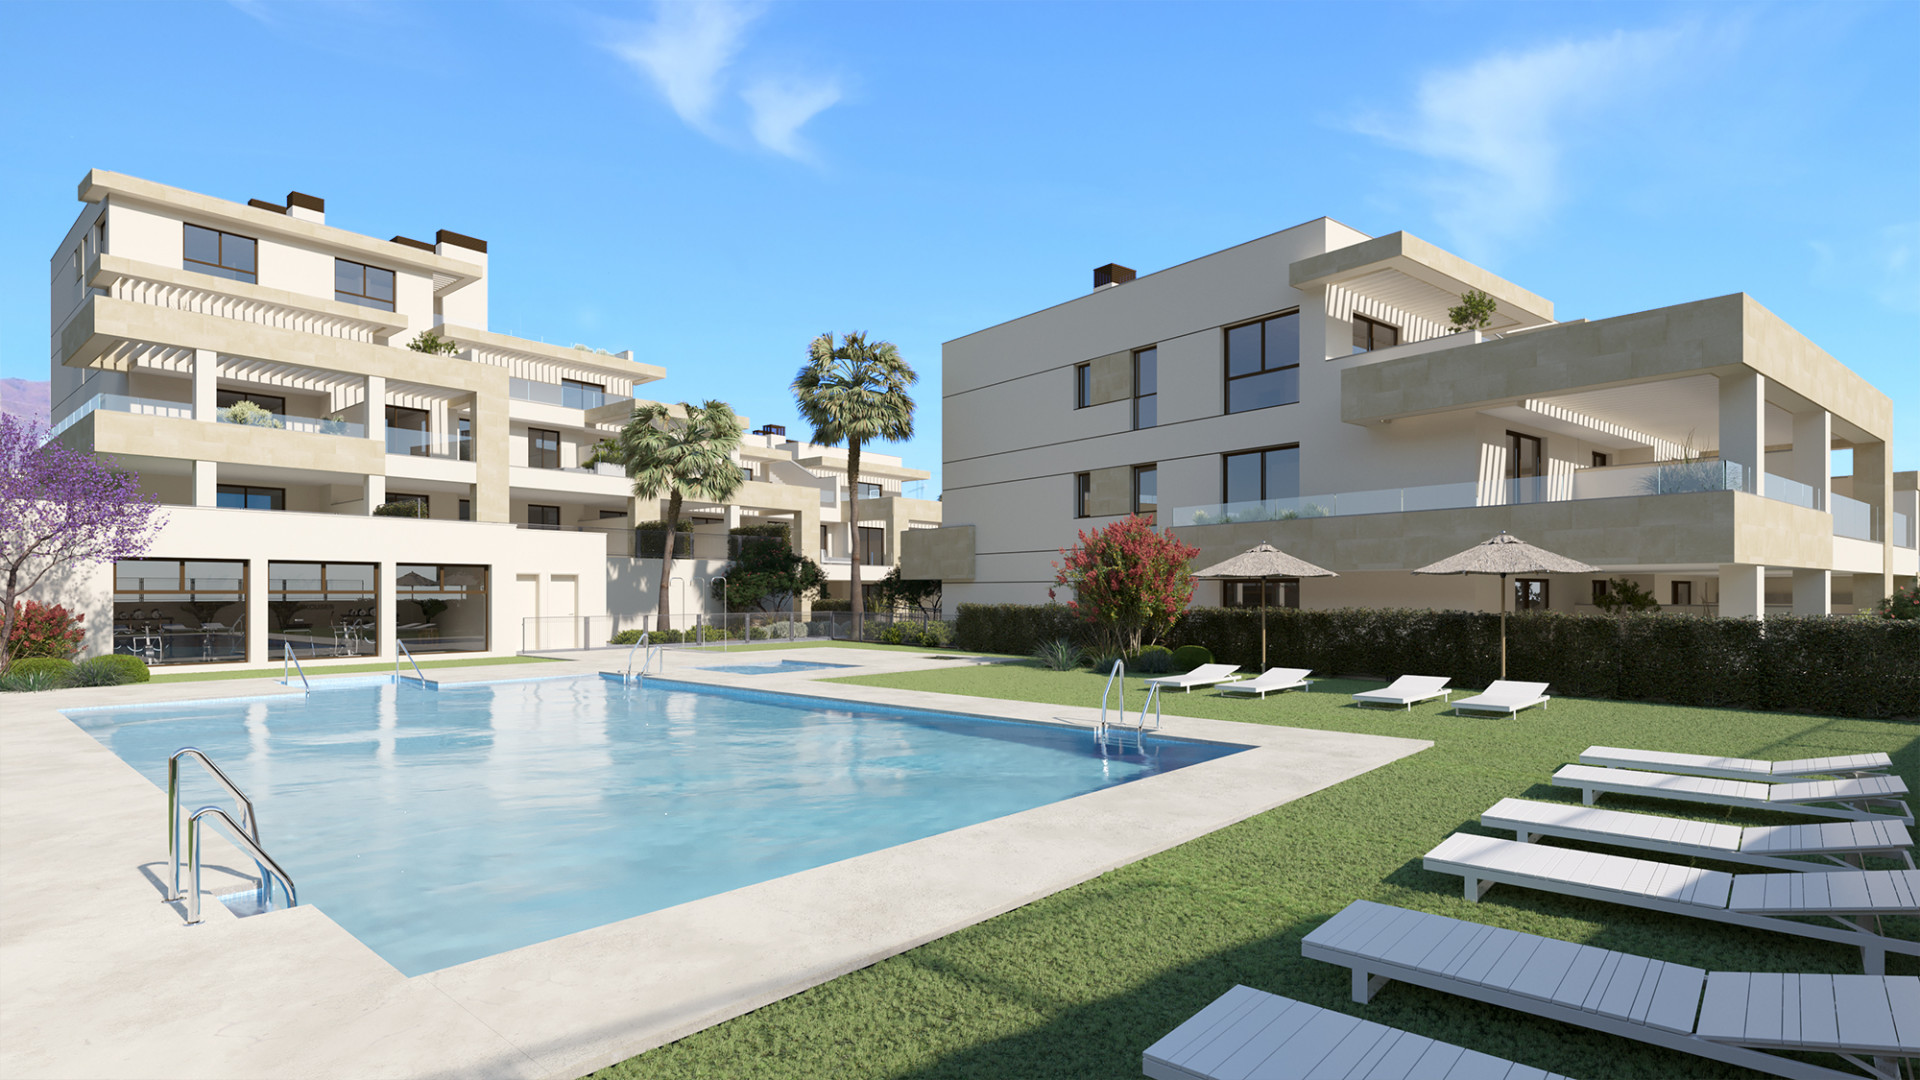 Bayside Homes: New residential complex of 41 homes located in Estepona. | Image 1